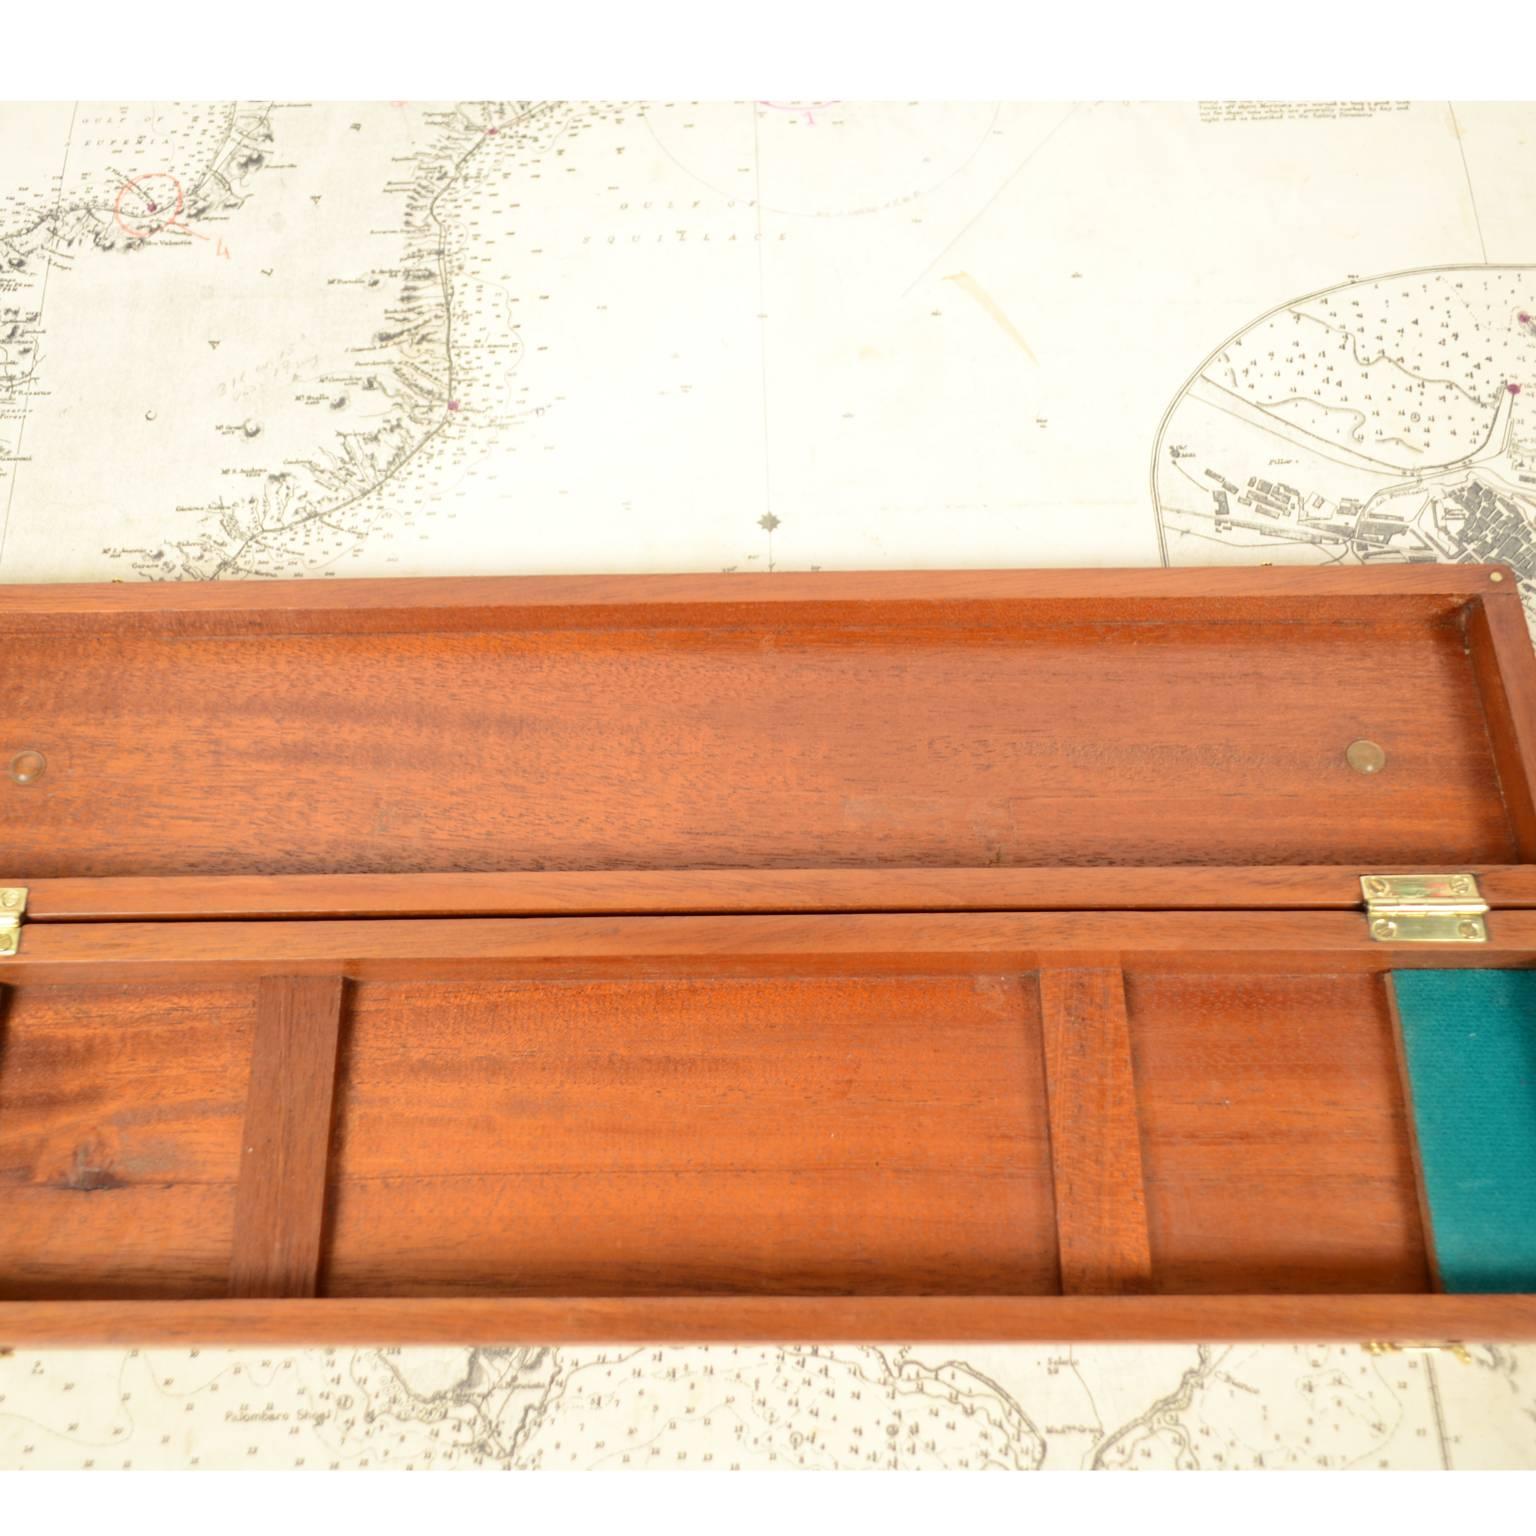 Boxwood Parallel for Nautical Charts Made in the Second Half of the 19th Century 2